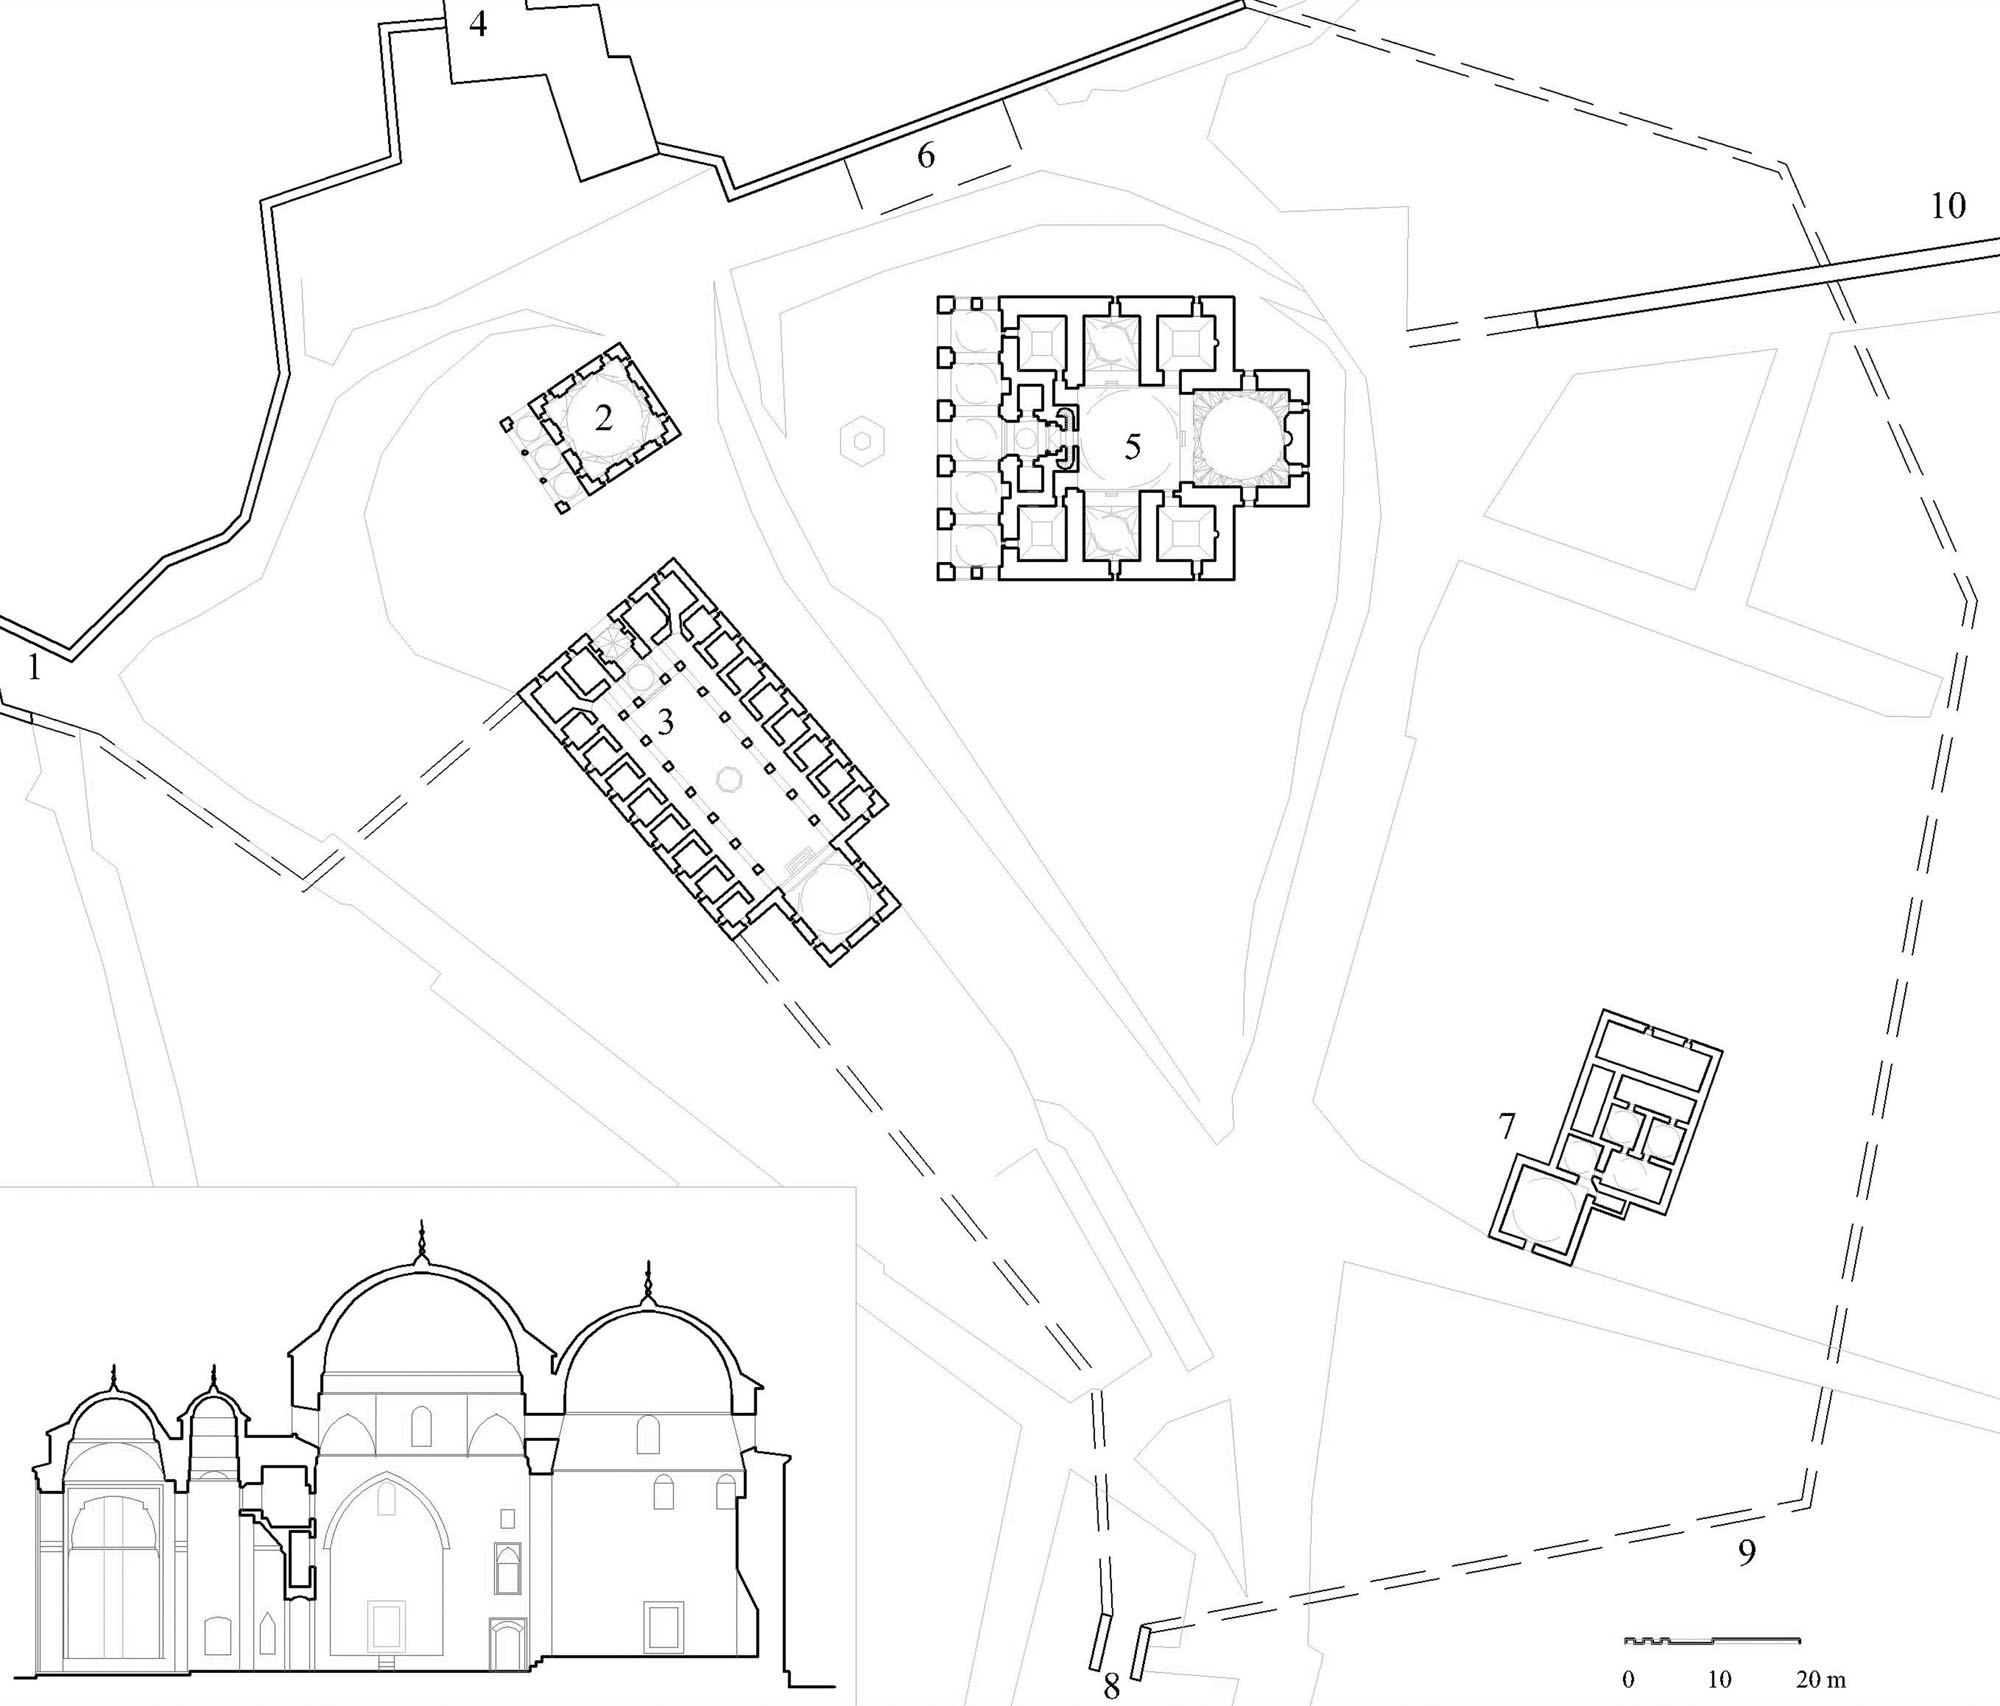 Yıldırım Bayezid Külliyesi - Floor plan of complex showing (1) gate, (2) mausoleum, (3) madrasa, (4) site of royal garden palace, (5) convent-masjid, (6) hospice, (7) bathhouse, (8) gate, (9) reconstruction of precinct wall, (10) aqueduct. DWG file in AutoCAD 2000 format. Click the download button to download a zipped file containing the .dwg file.